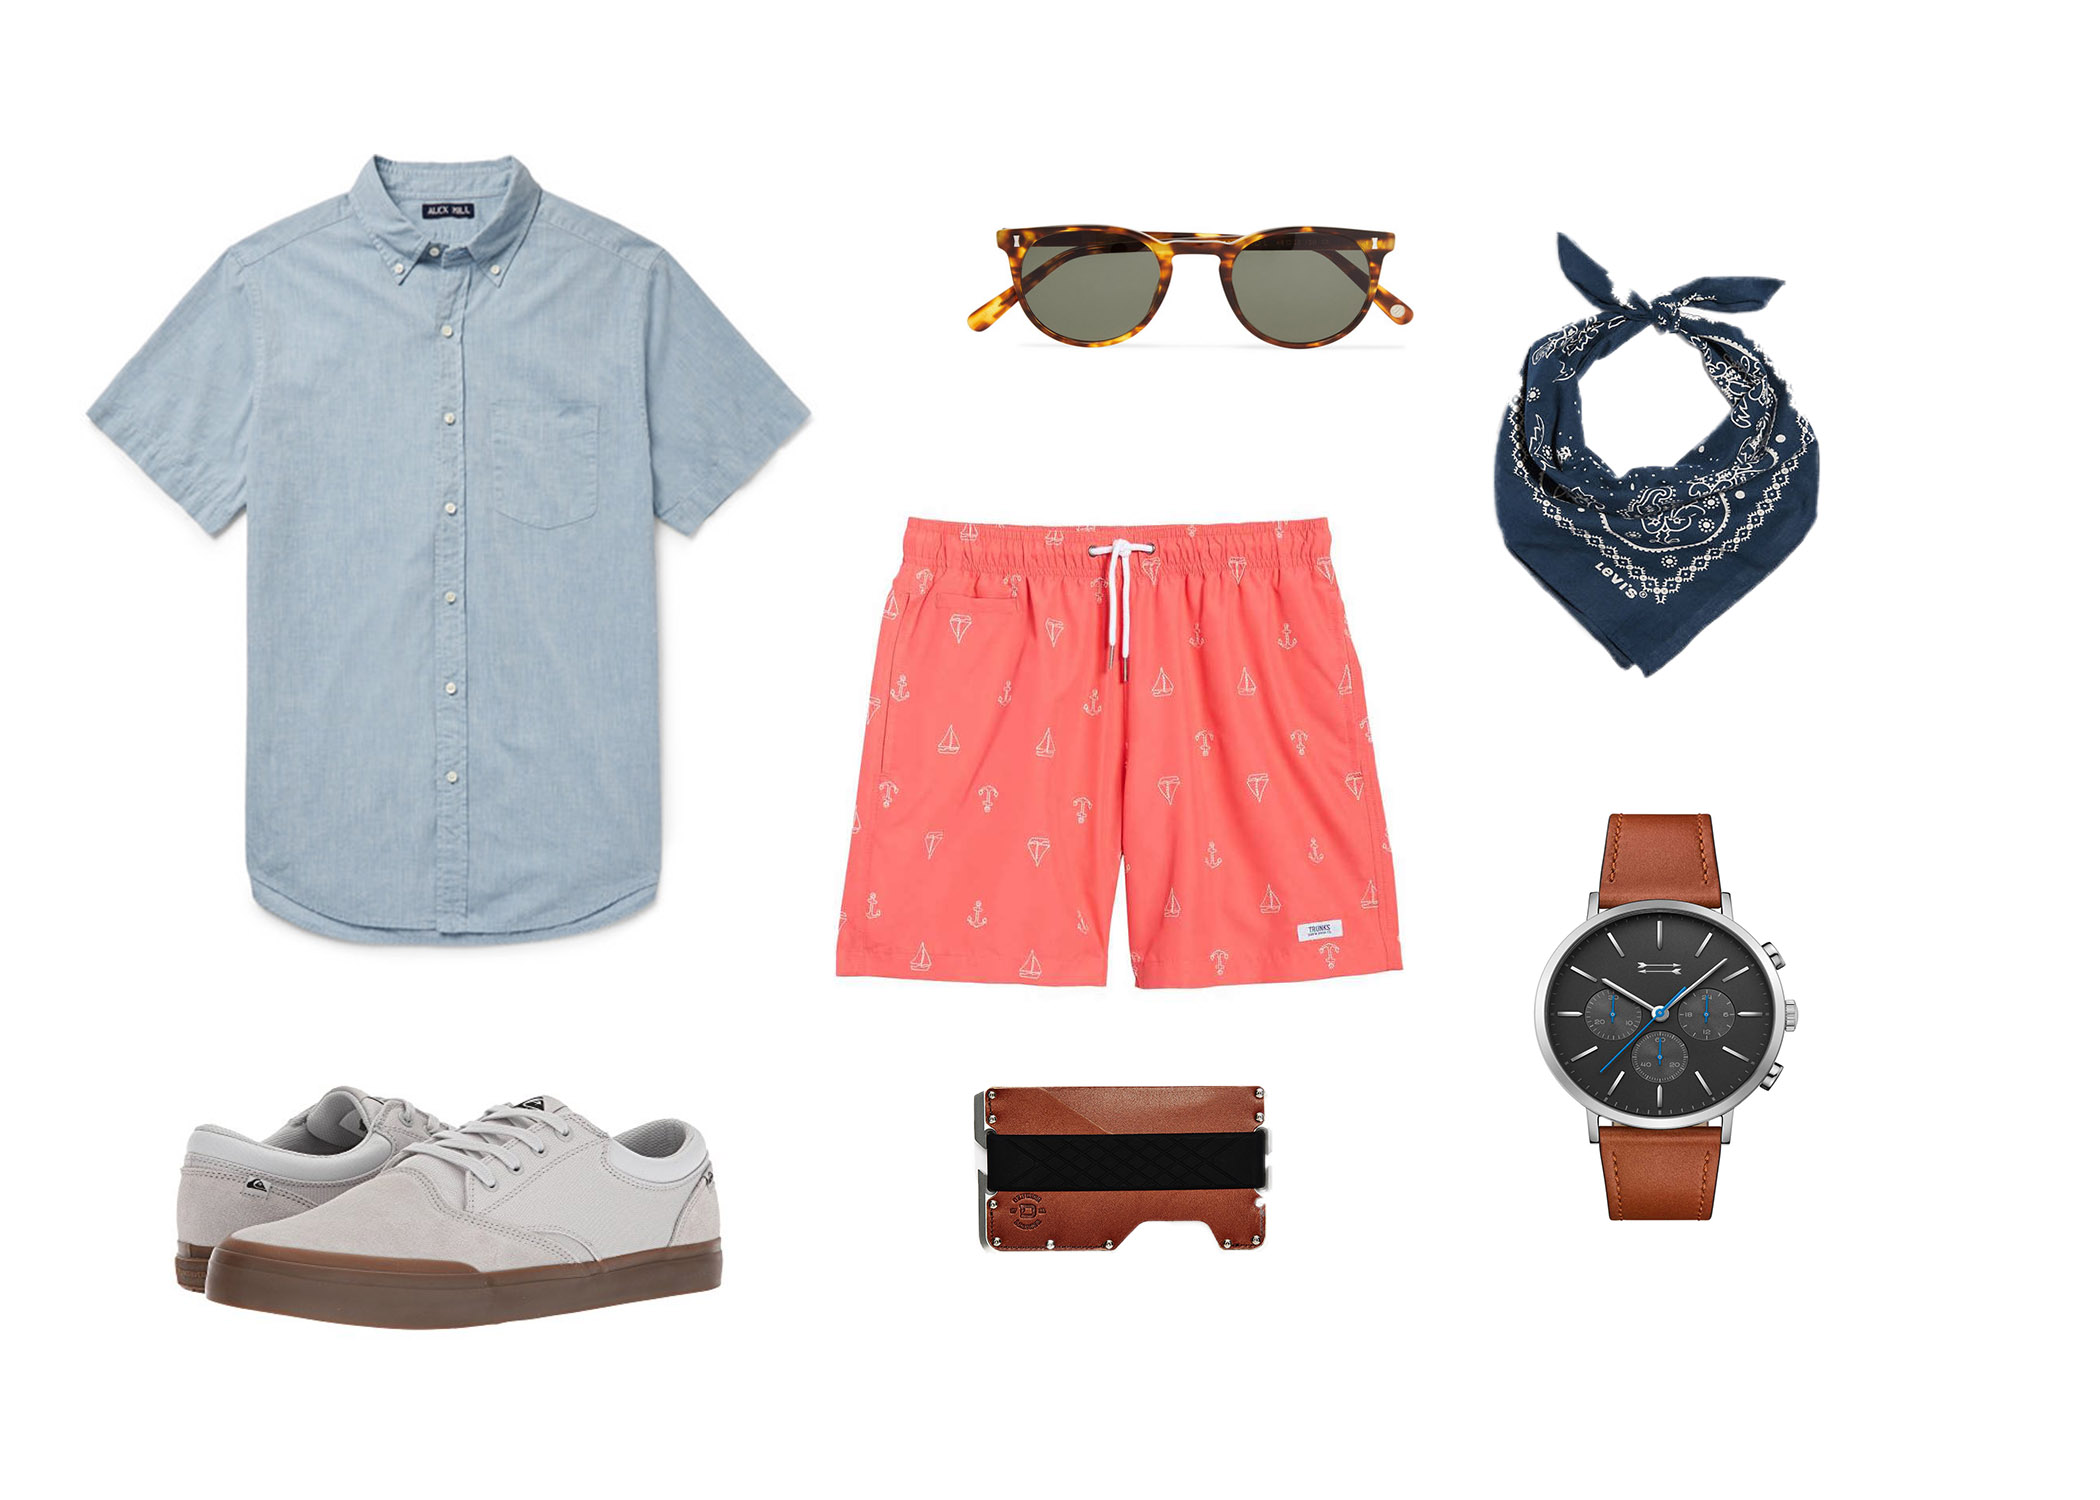 memorial day weekend guys outfit inspiration